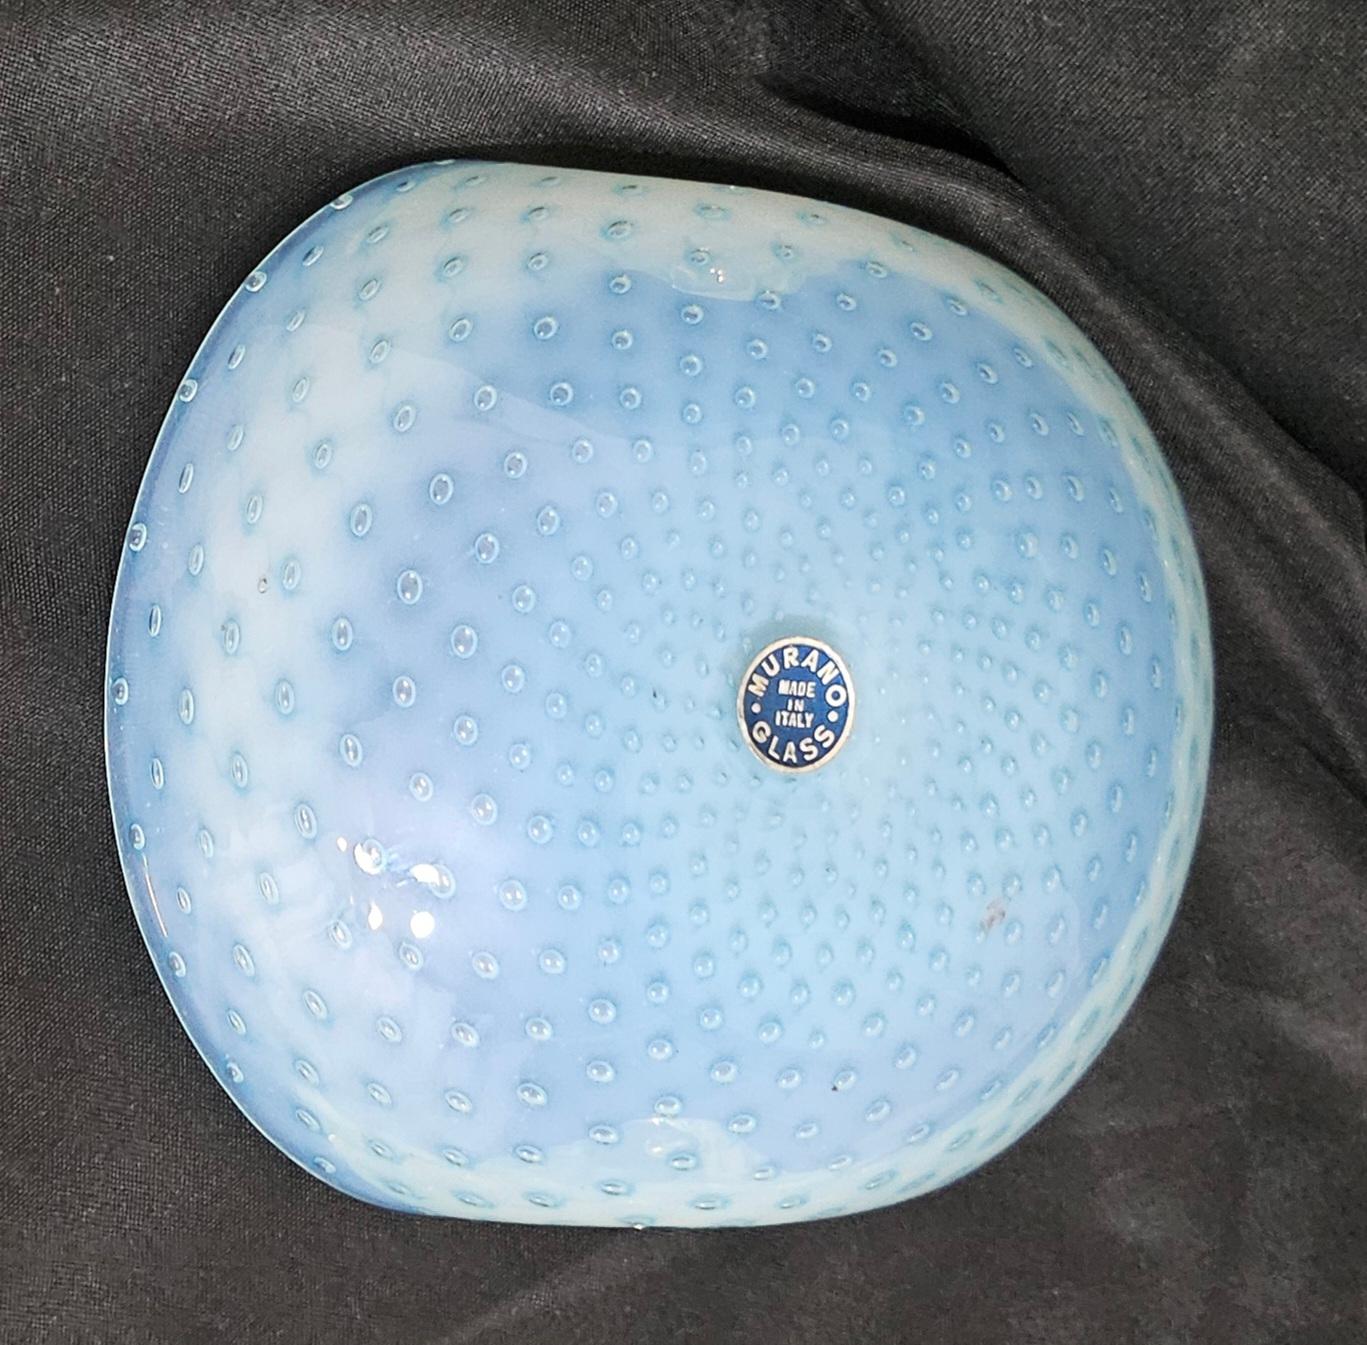 Original Fratelli Toso Label, Murano Glass Bullicante Decorative Dish, Opaline 
Measures about 6.5 x 5.5 x 1.5 inches.
This appears to be an opaline type glass, light blue in white.
On a light background the colors will look lighter.
Good vintage